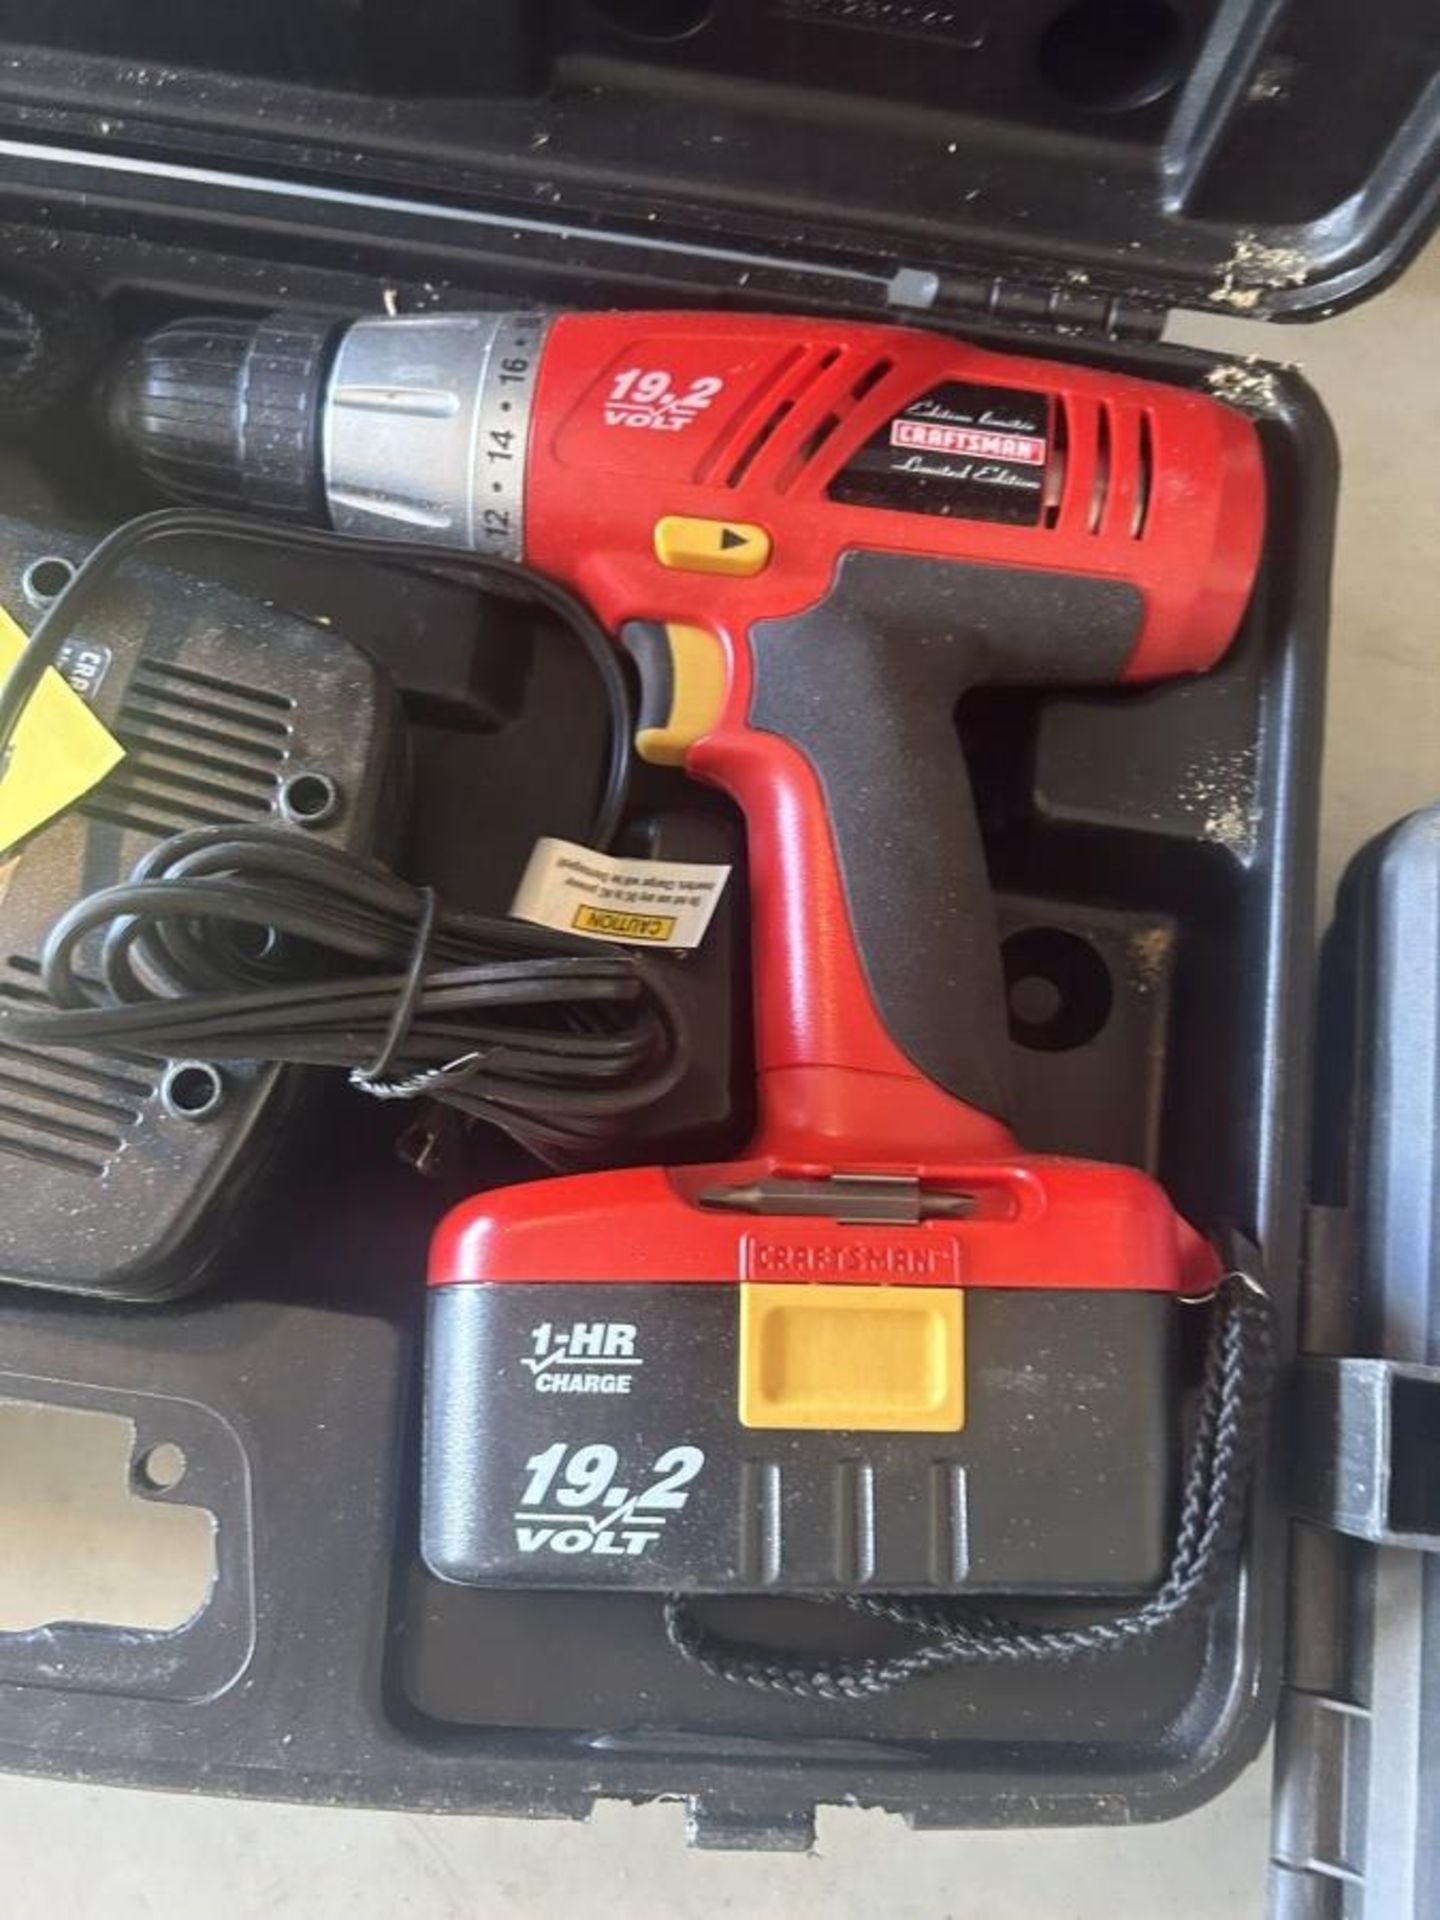 CRAFTSMAN CORDLESS DRILL W/ BATTERY, CHARGER & LIGHT - Image 2 of 4